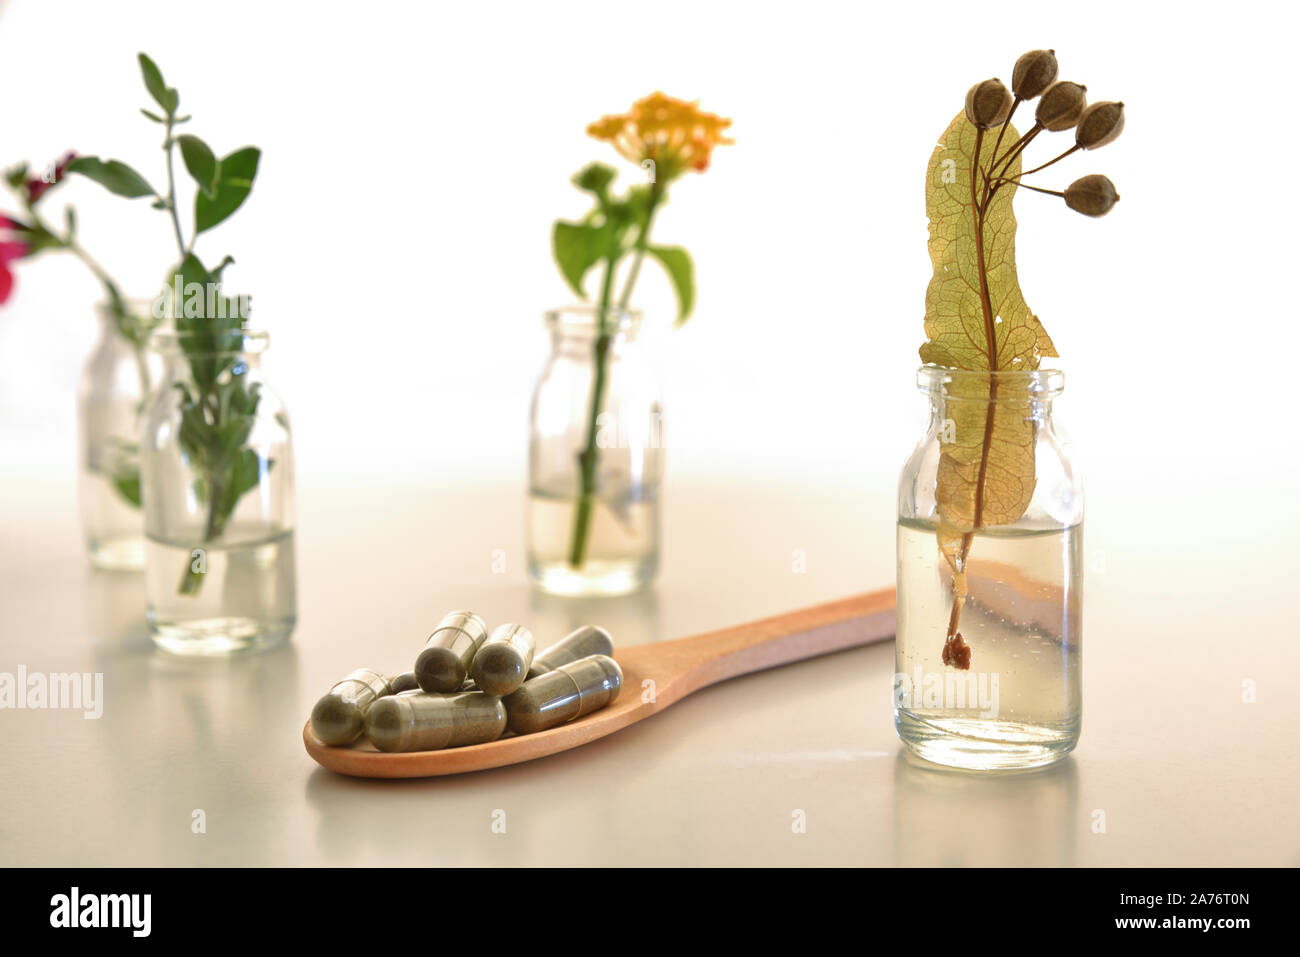 Bottles with plant essence liquid with plants inside and natural herb capsules on white table. Alternative natural medicine concept. Front view. Horiz Stock Photo